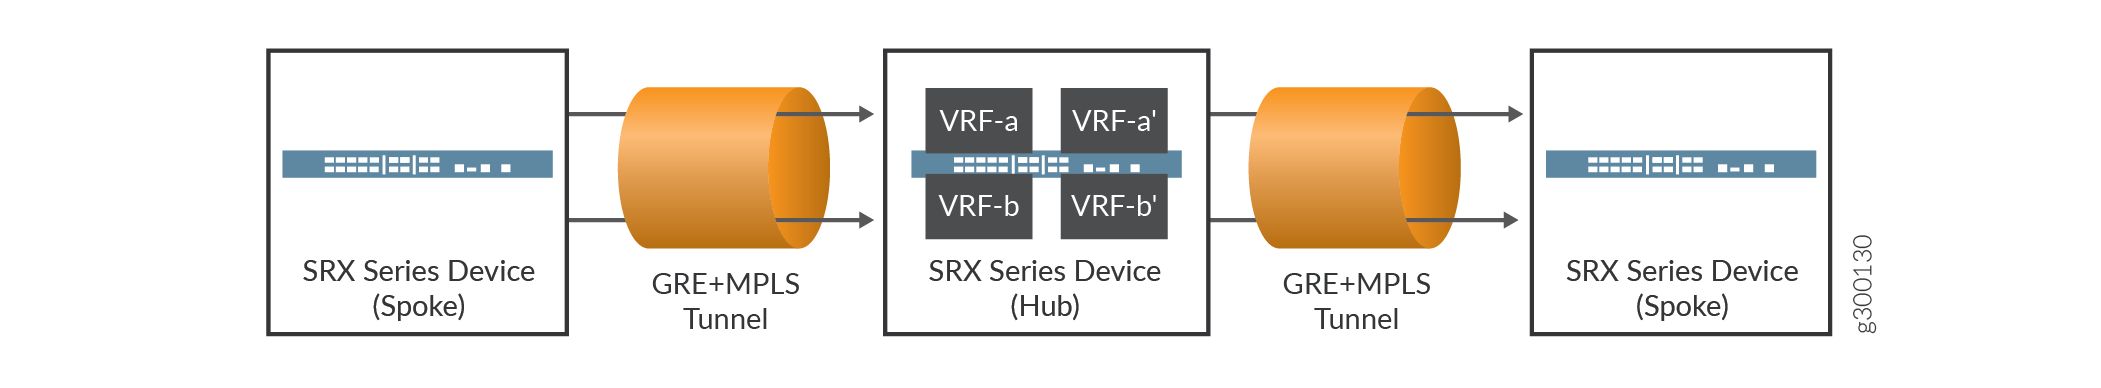 Permitting VRF-Based Traffic from an MPLS Network to an MPLS Network over GRE without NAT